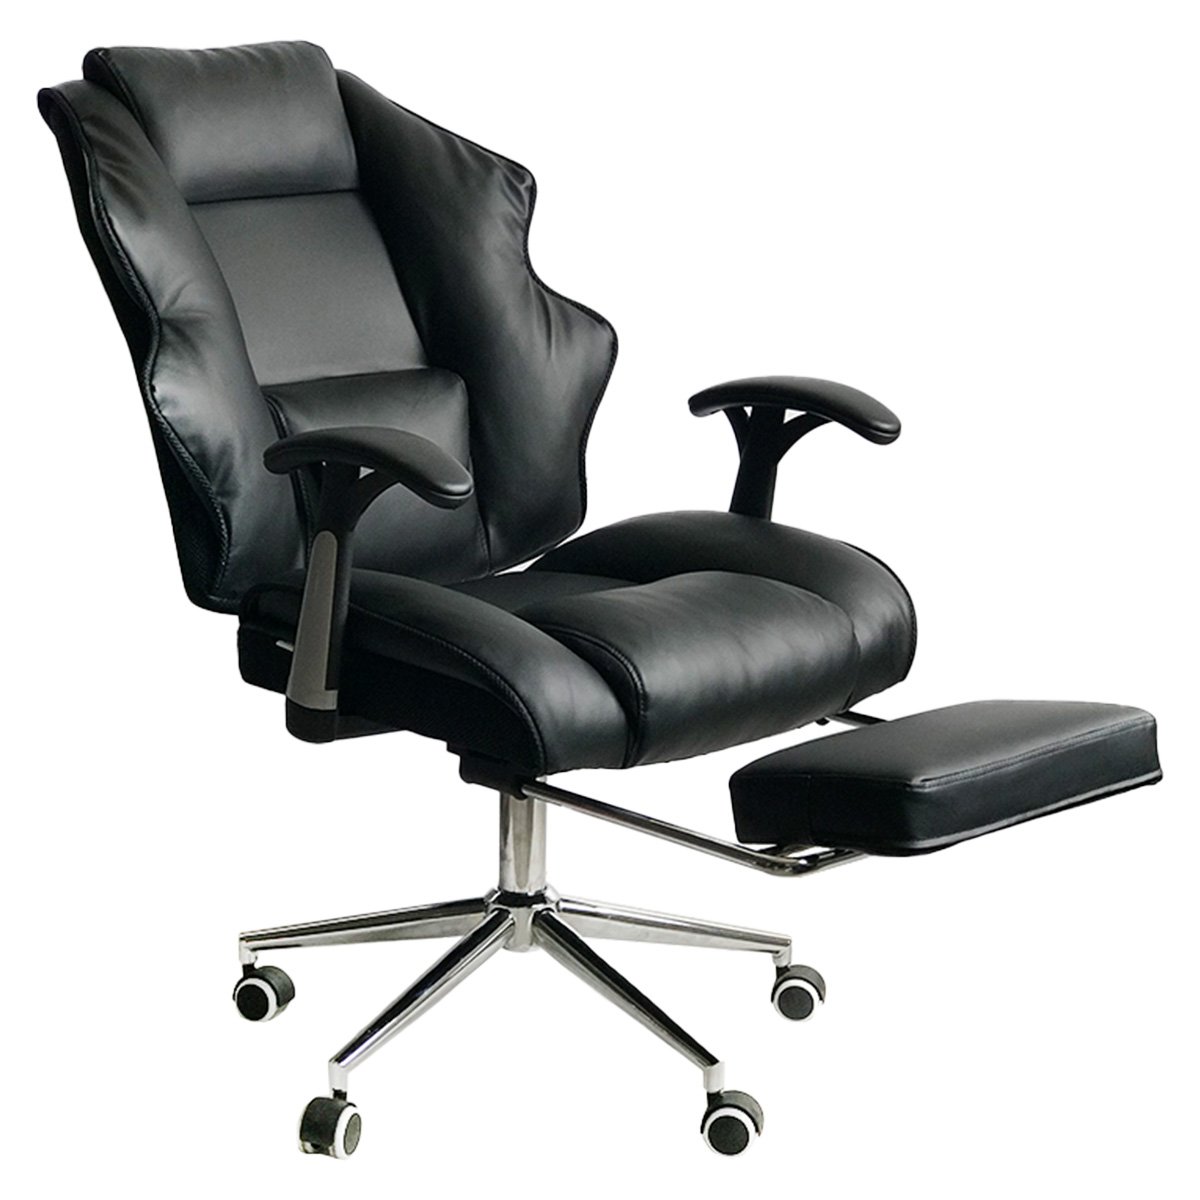 Faux Leather High Back Reclining Executive Office Chair w/ Stool Black 1